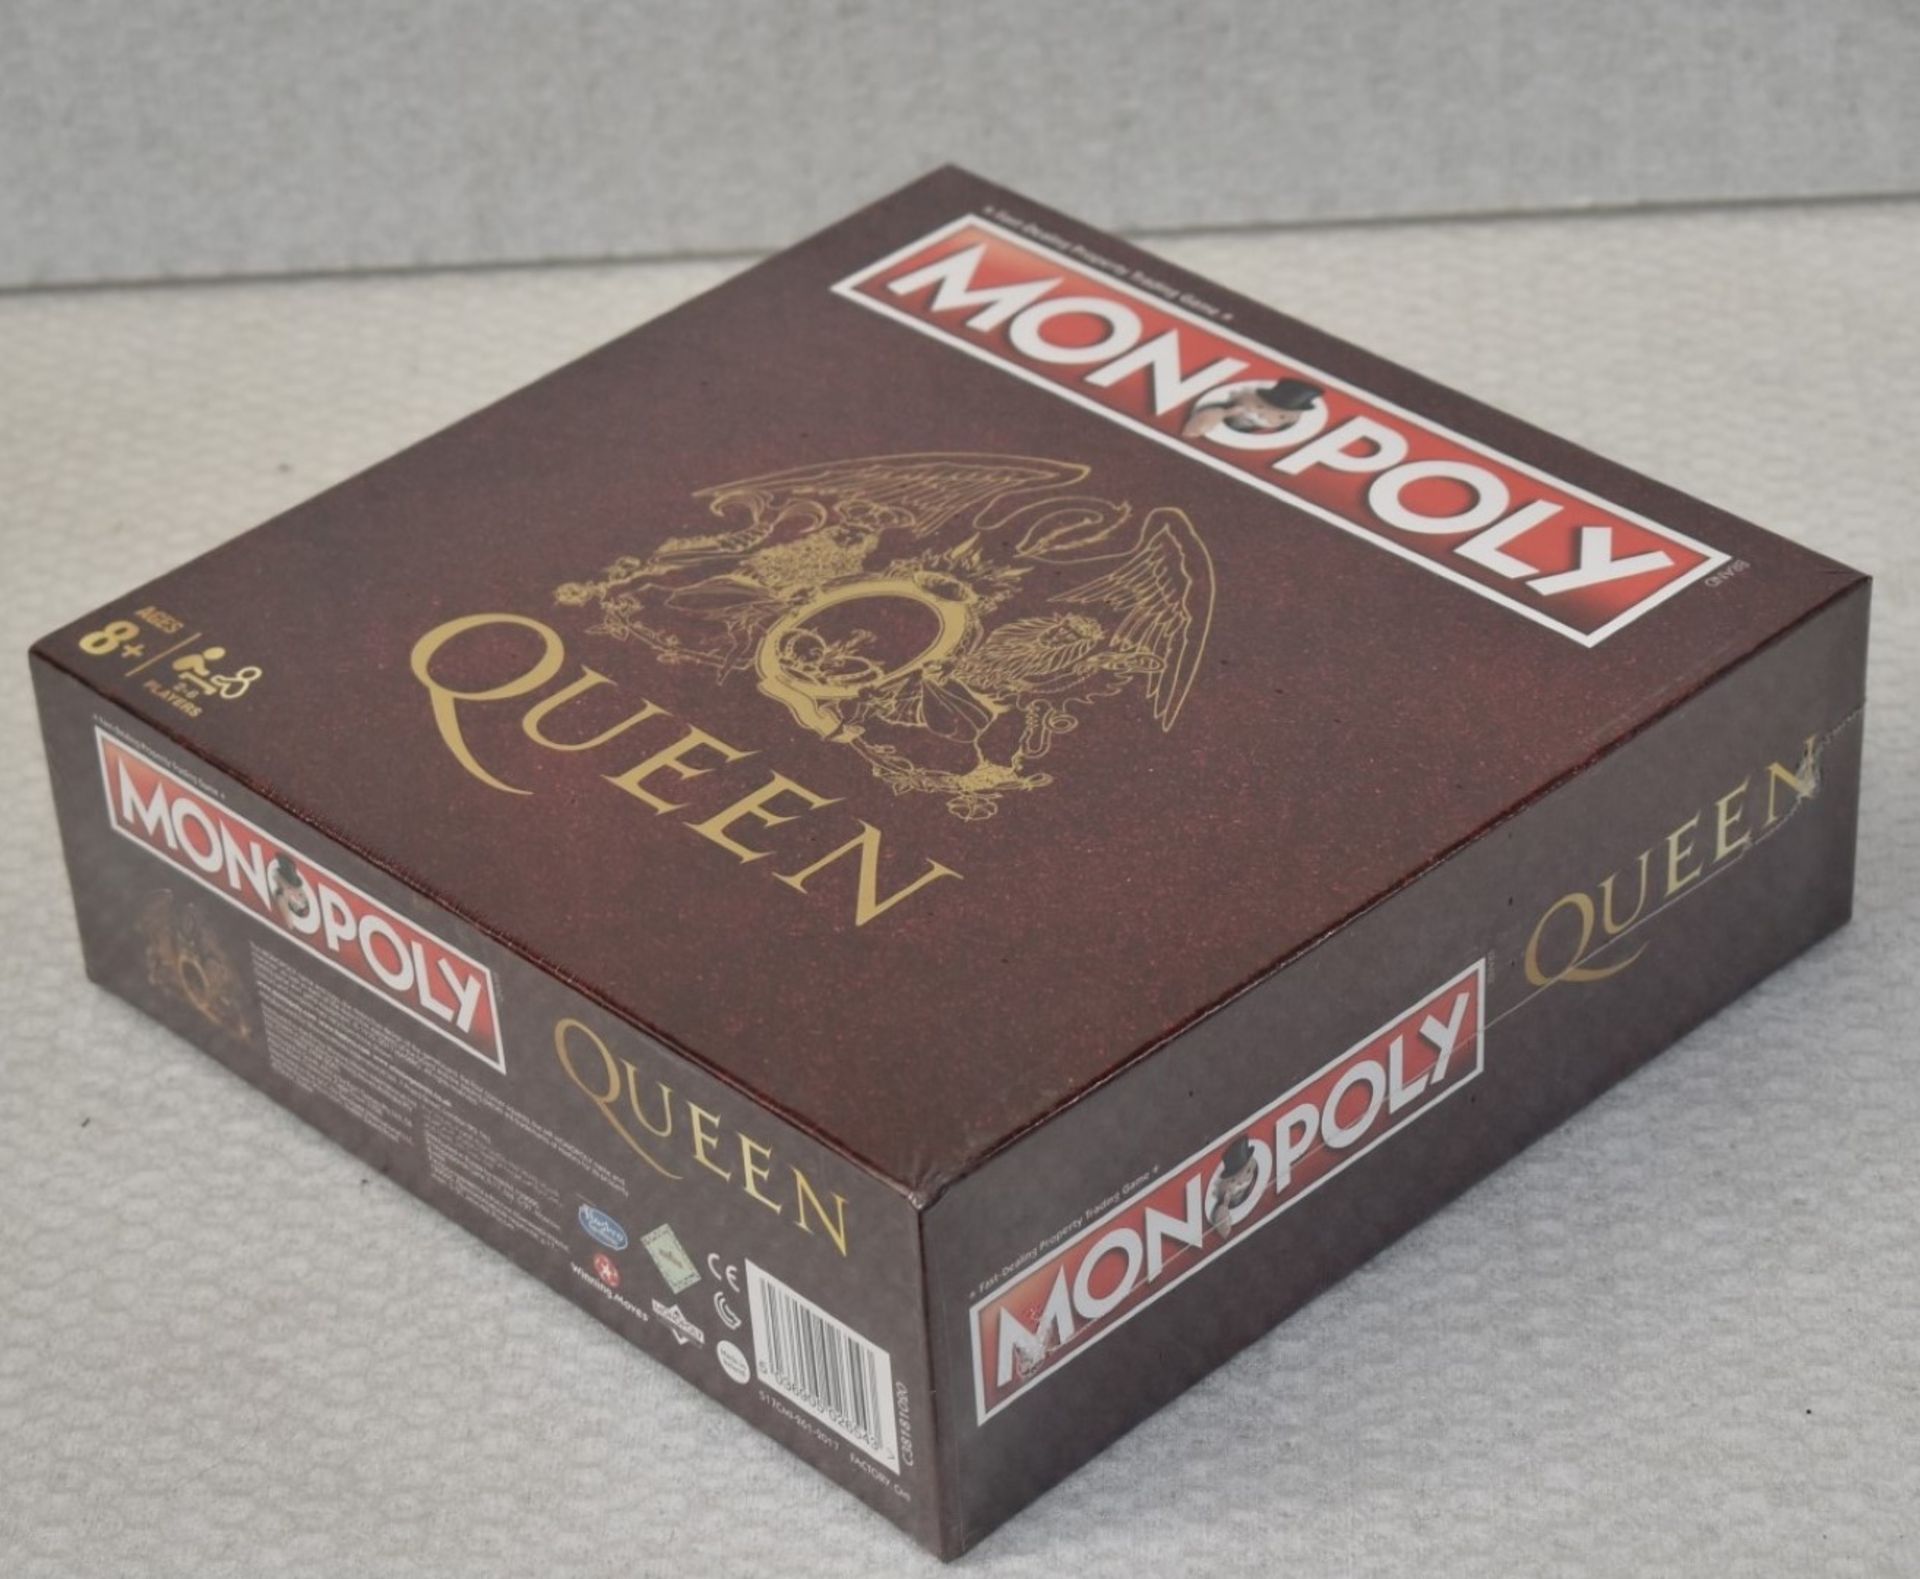 1 x Monopoly Board Game - QUEEN COLLECTORS EDITION - Officially Licensed Merchandise - New & Sealed - Image 10 of 10